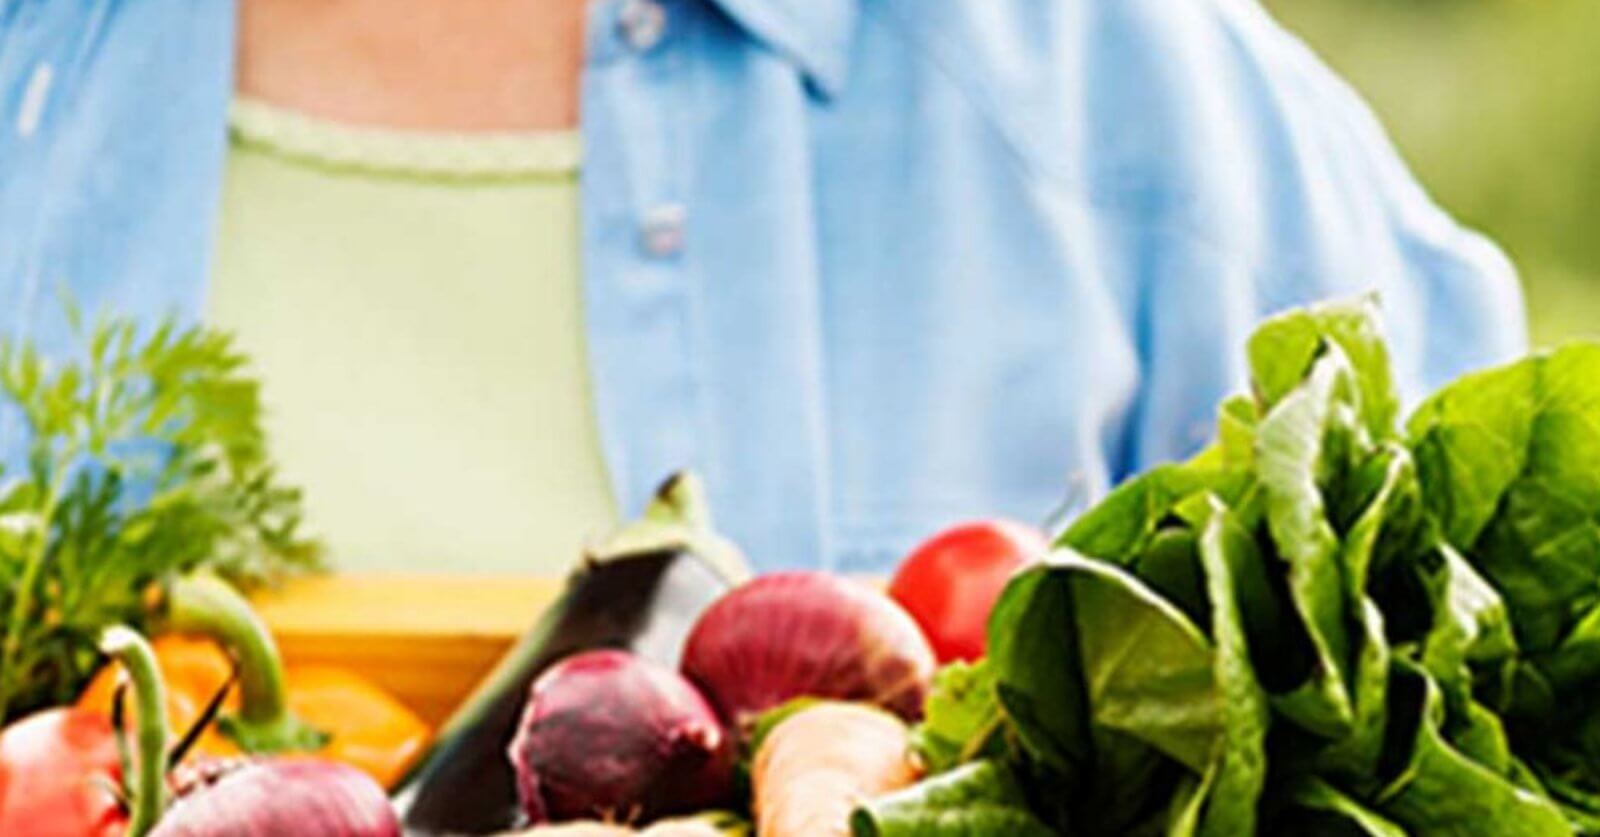 A person holding a wooden basket full of vibrant fresh vegetables including red apples, green lettuce, and purple beets, all sourced from organic hotspots, with a focus on healthy eating. The person wears a light green shirt and blue jacket.